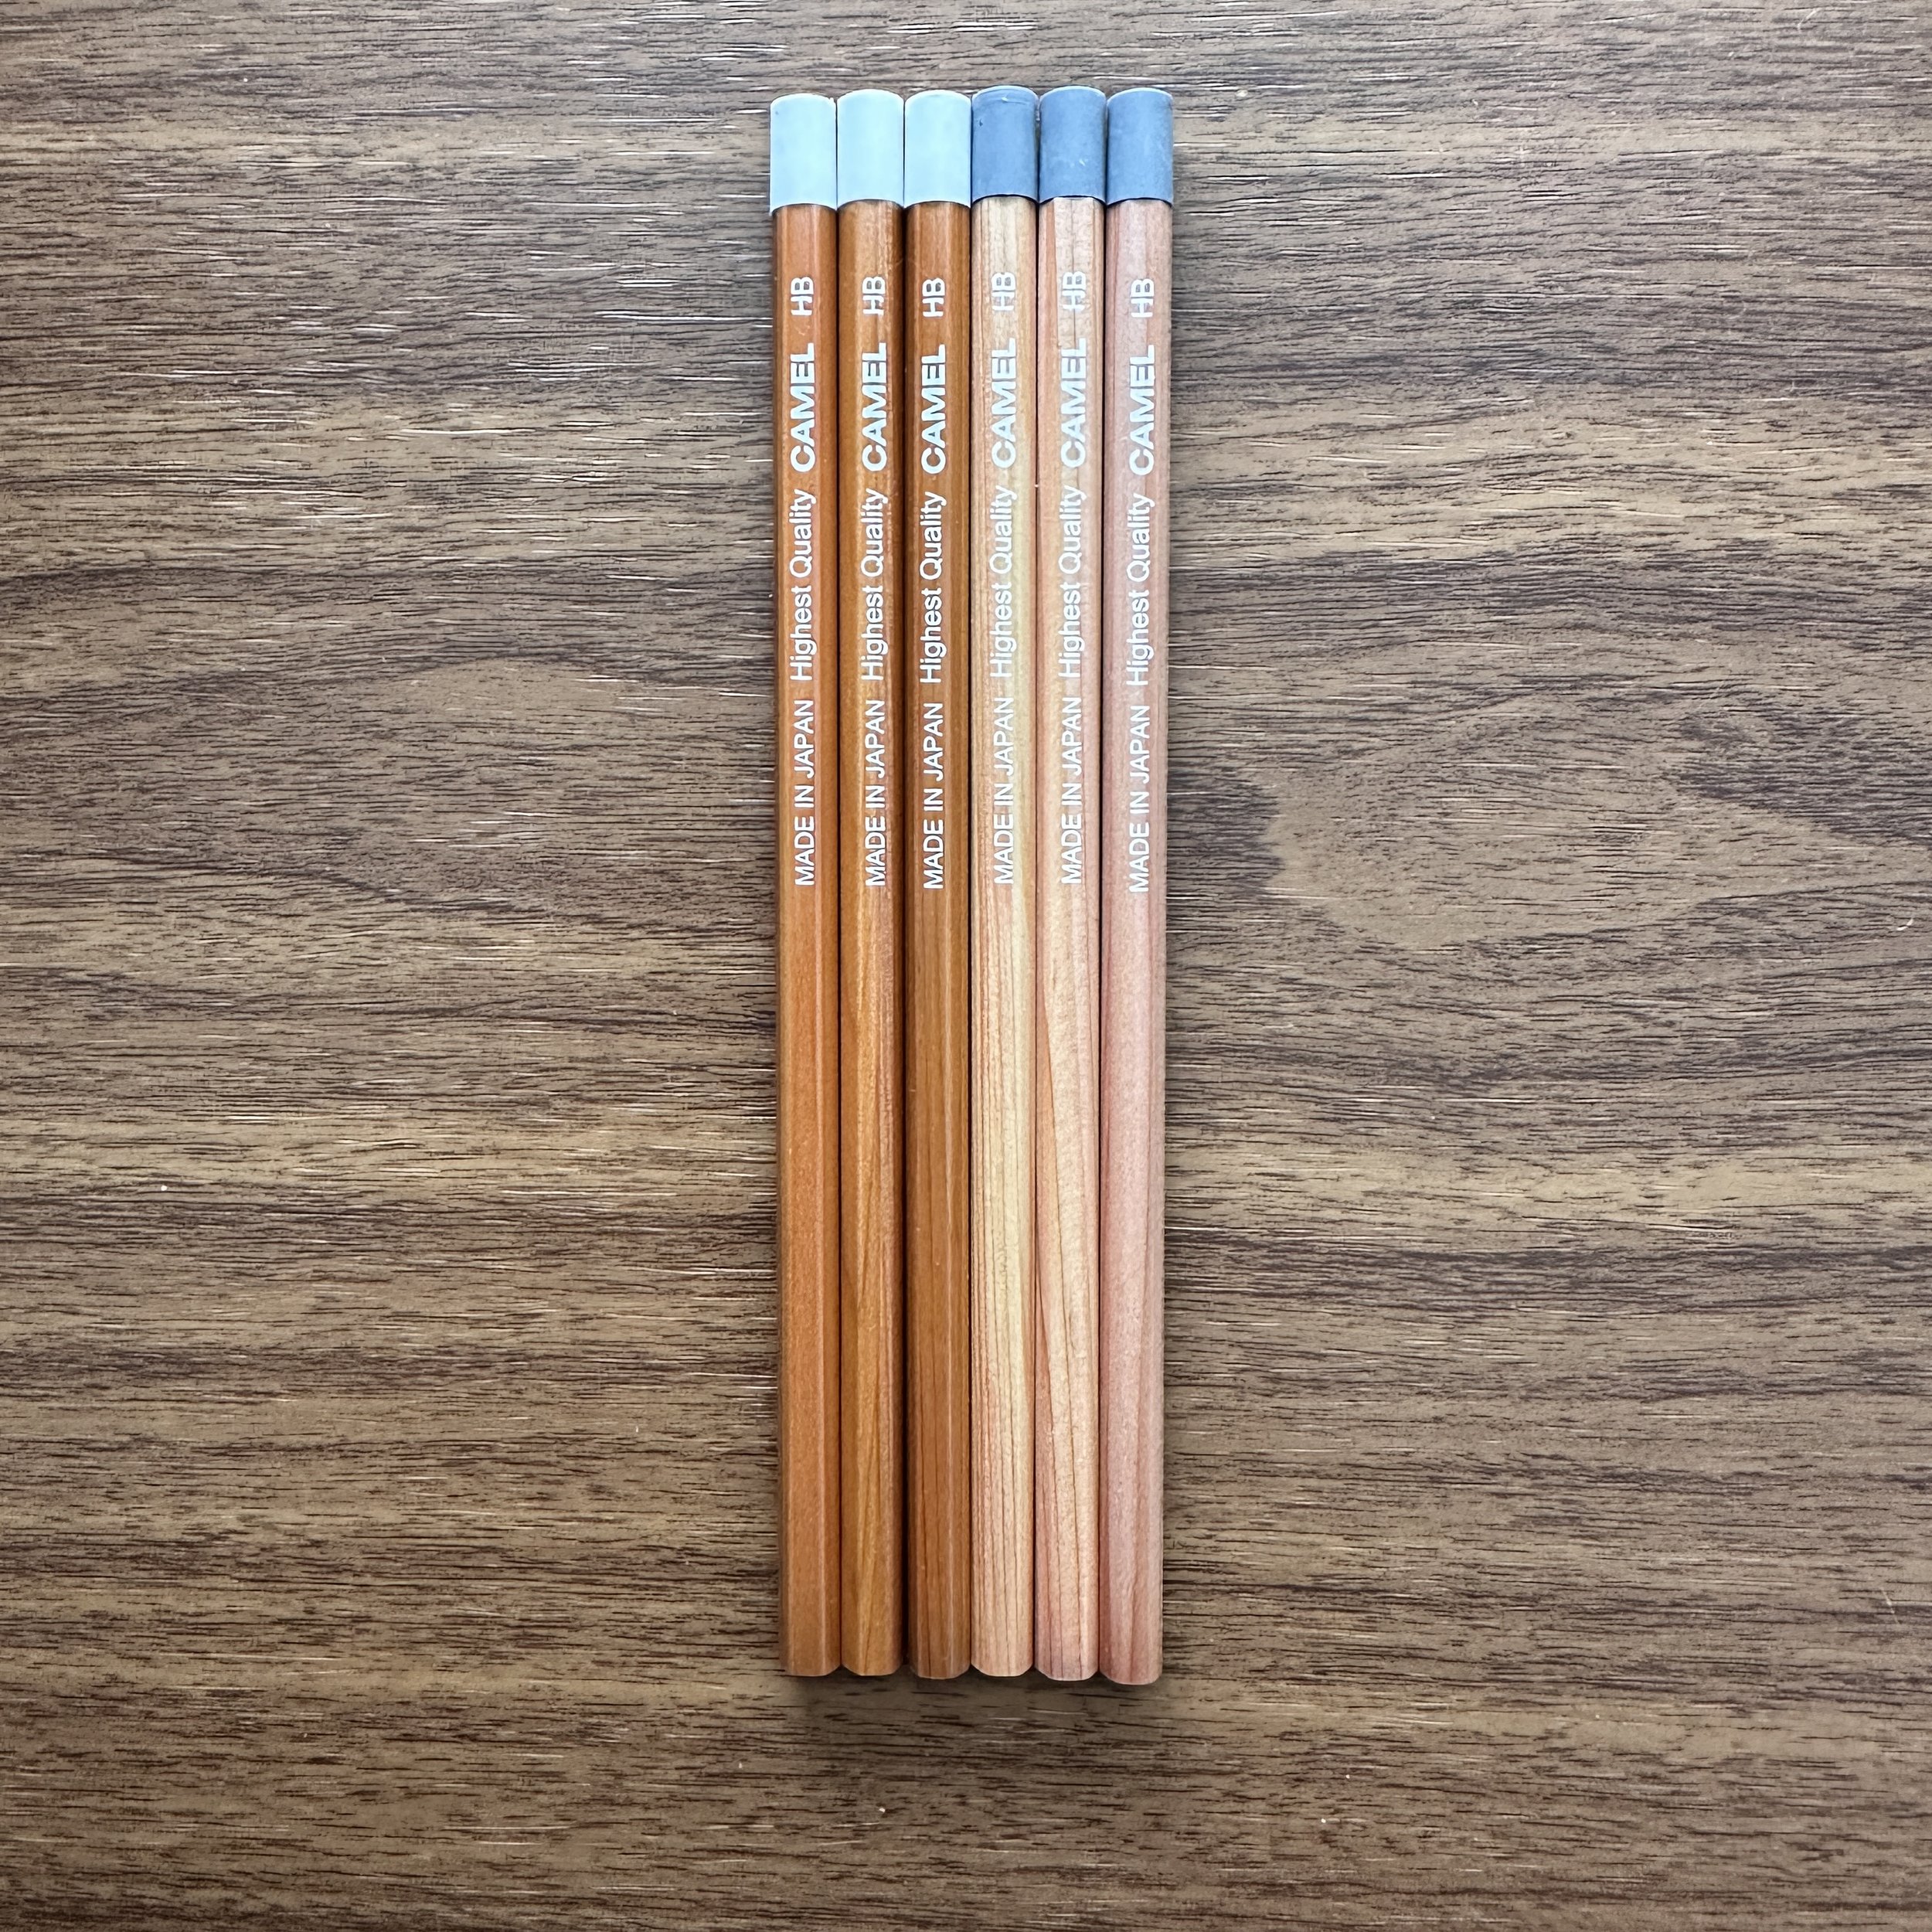 Pencil Review: The Original (Palomino) Blackwing — The Gentleman Stationer